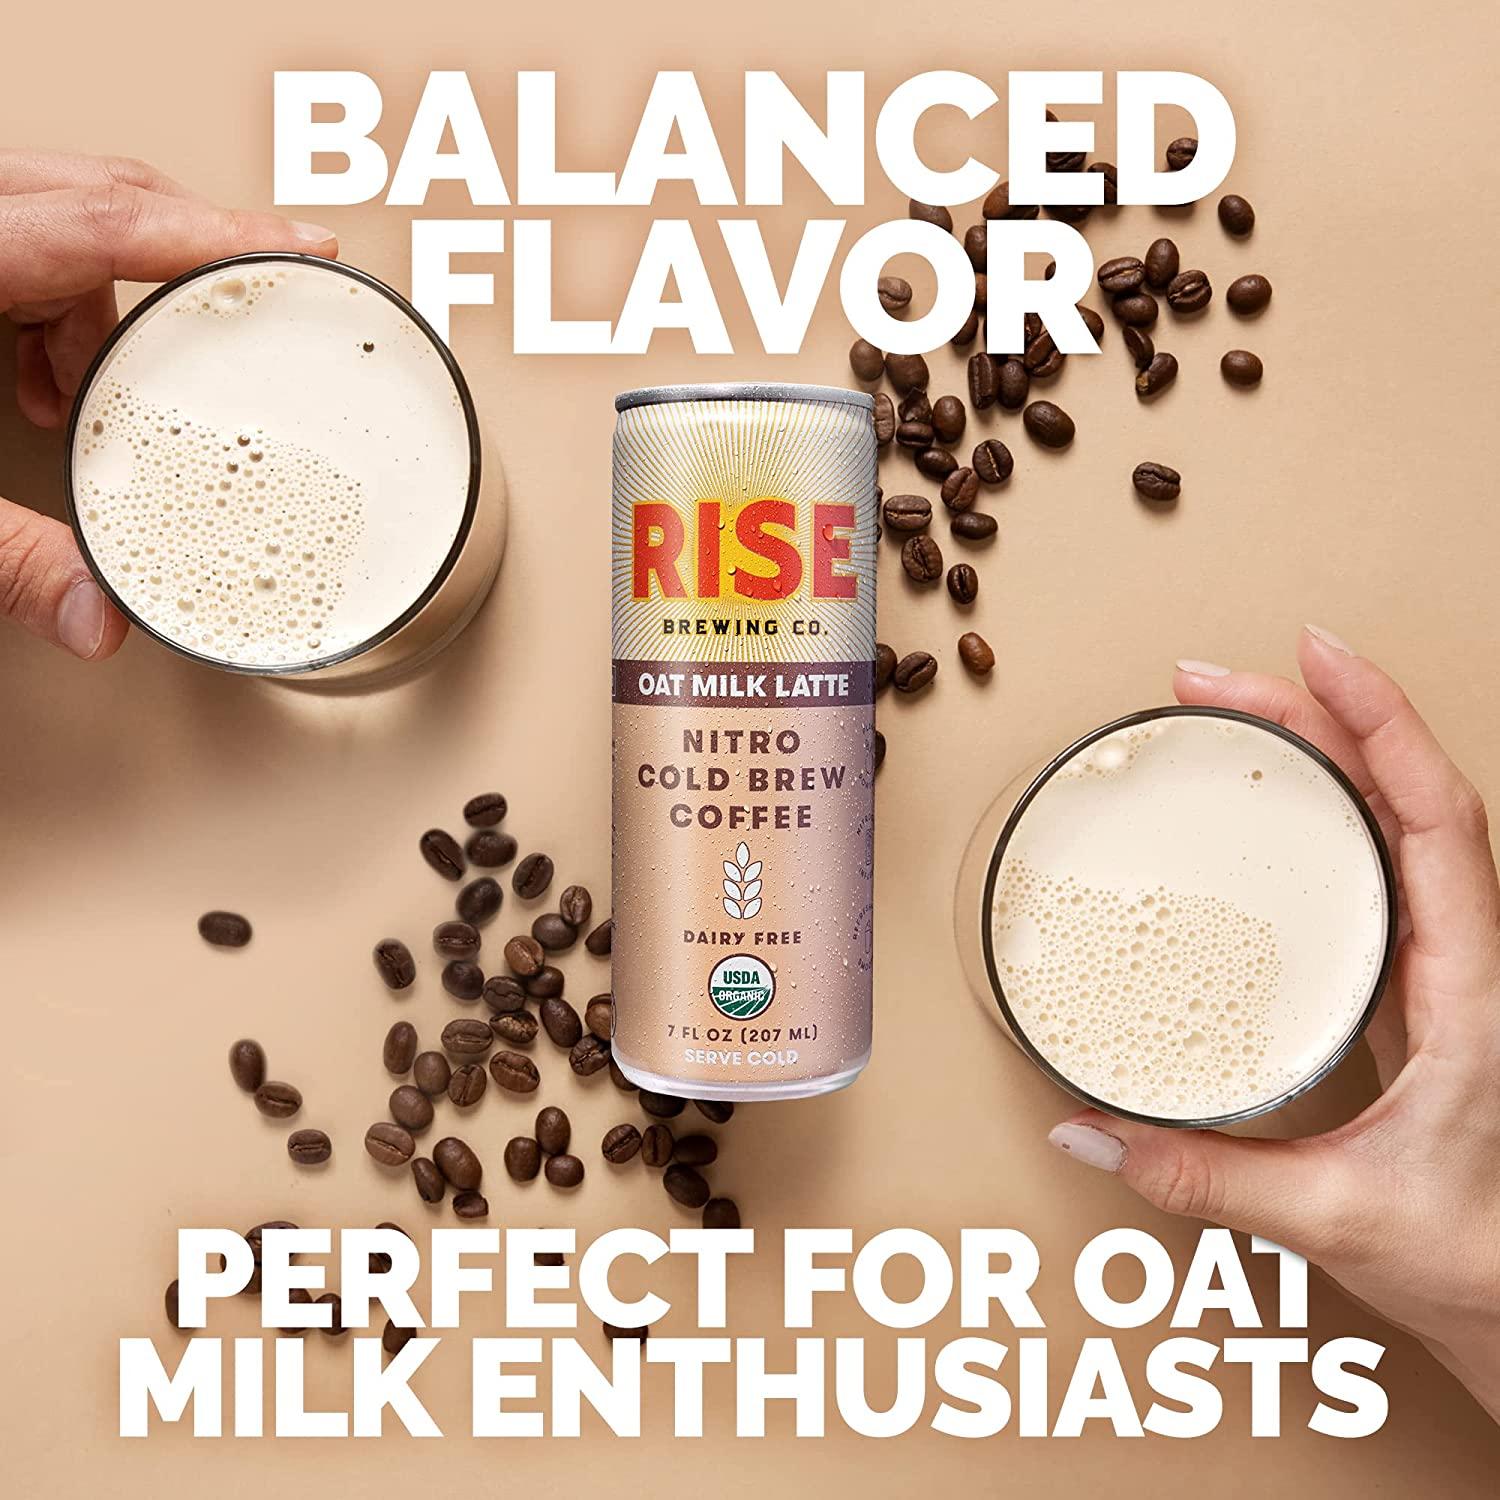 RISE Brewing Co. - Nitro Cold Brew Coffee and Organic Oat Milk